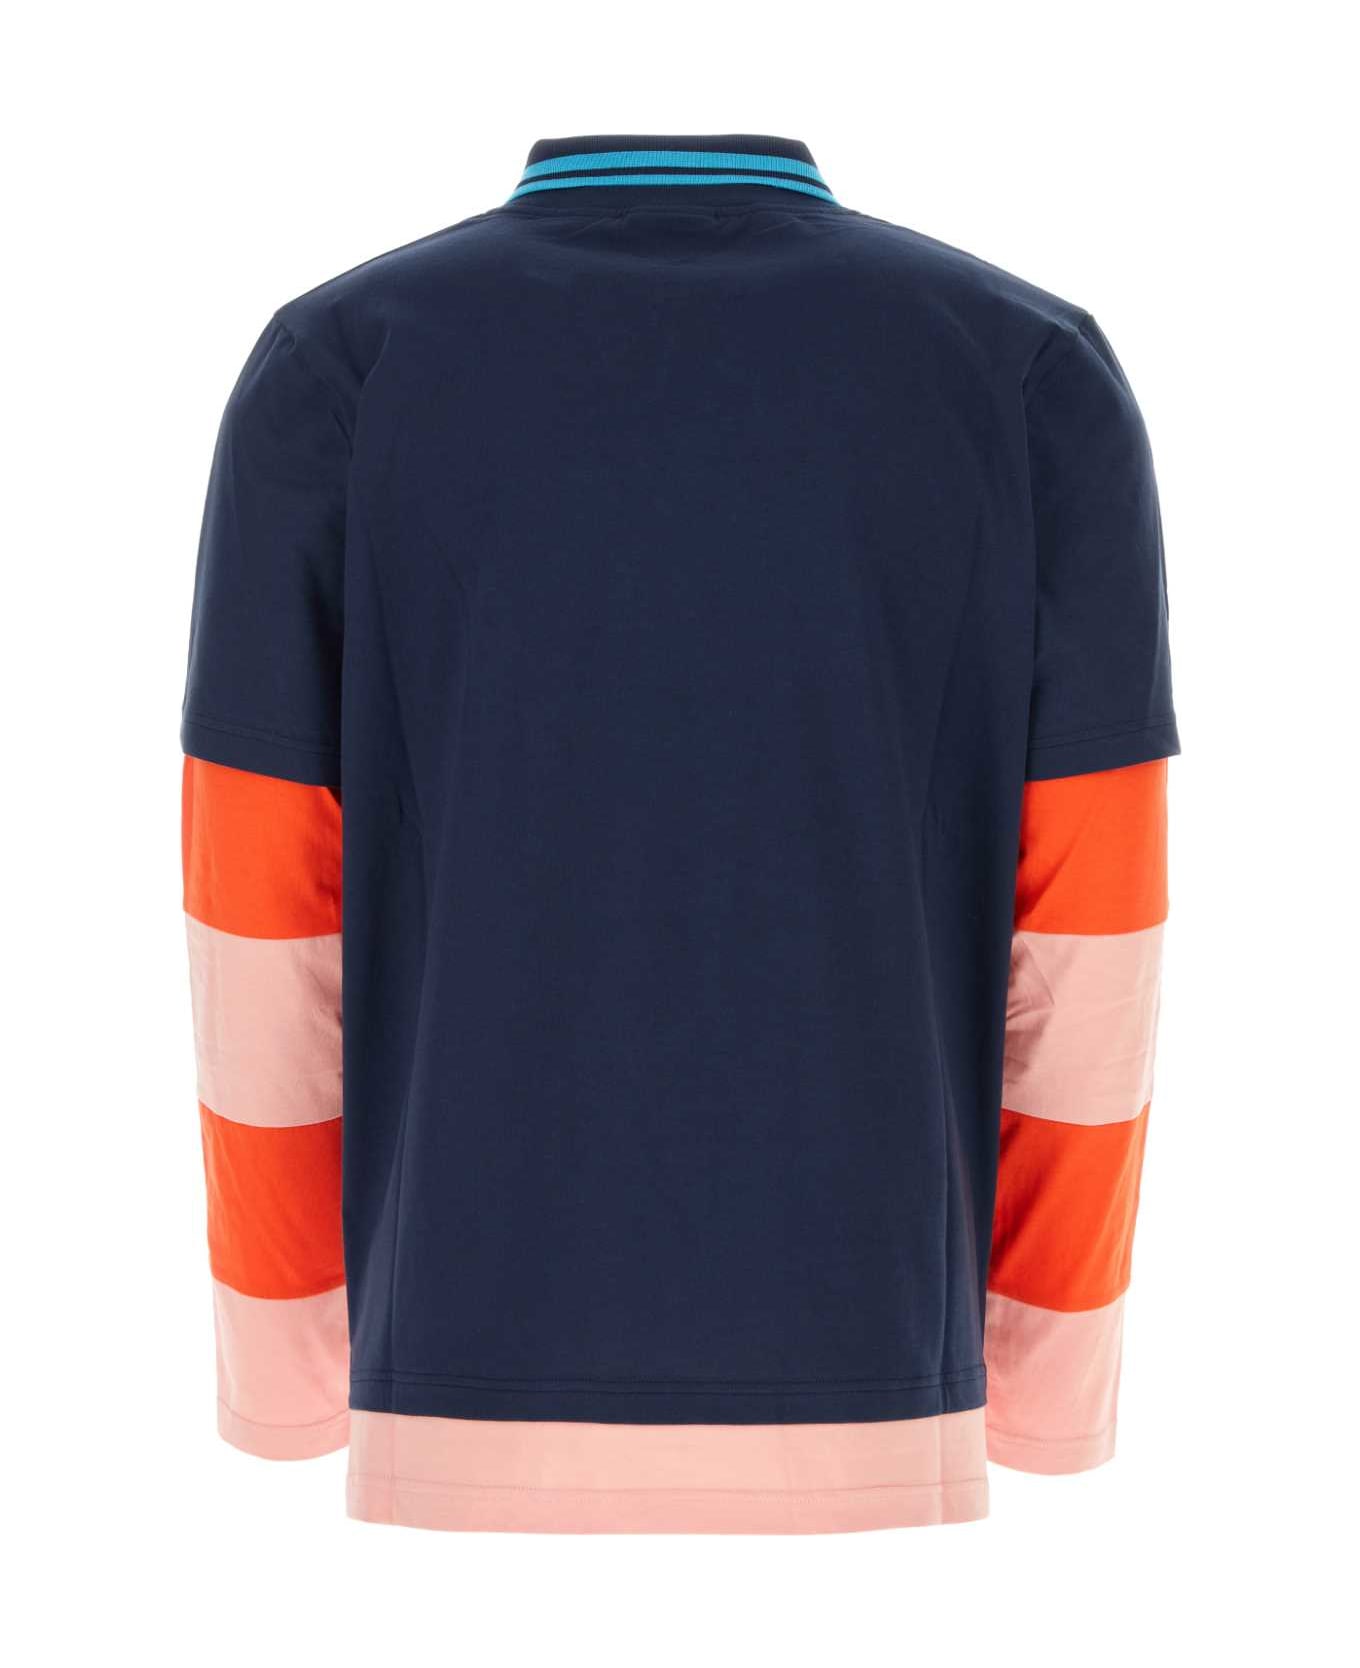 Botter Multicolor Cotton Polo Shirt - NAVY PINKSTR CARIBBEAN COUTURE ポロシャツ